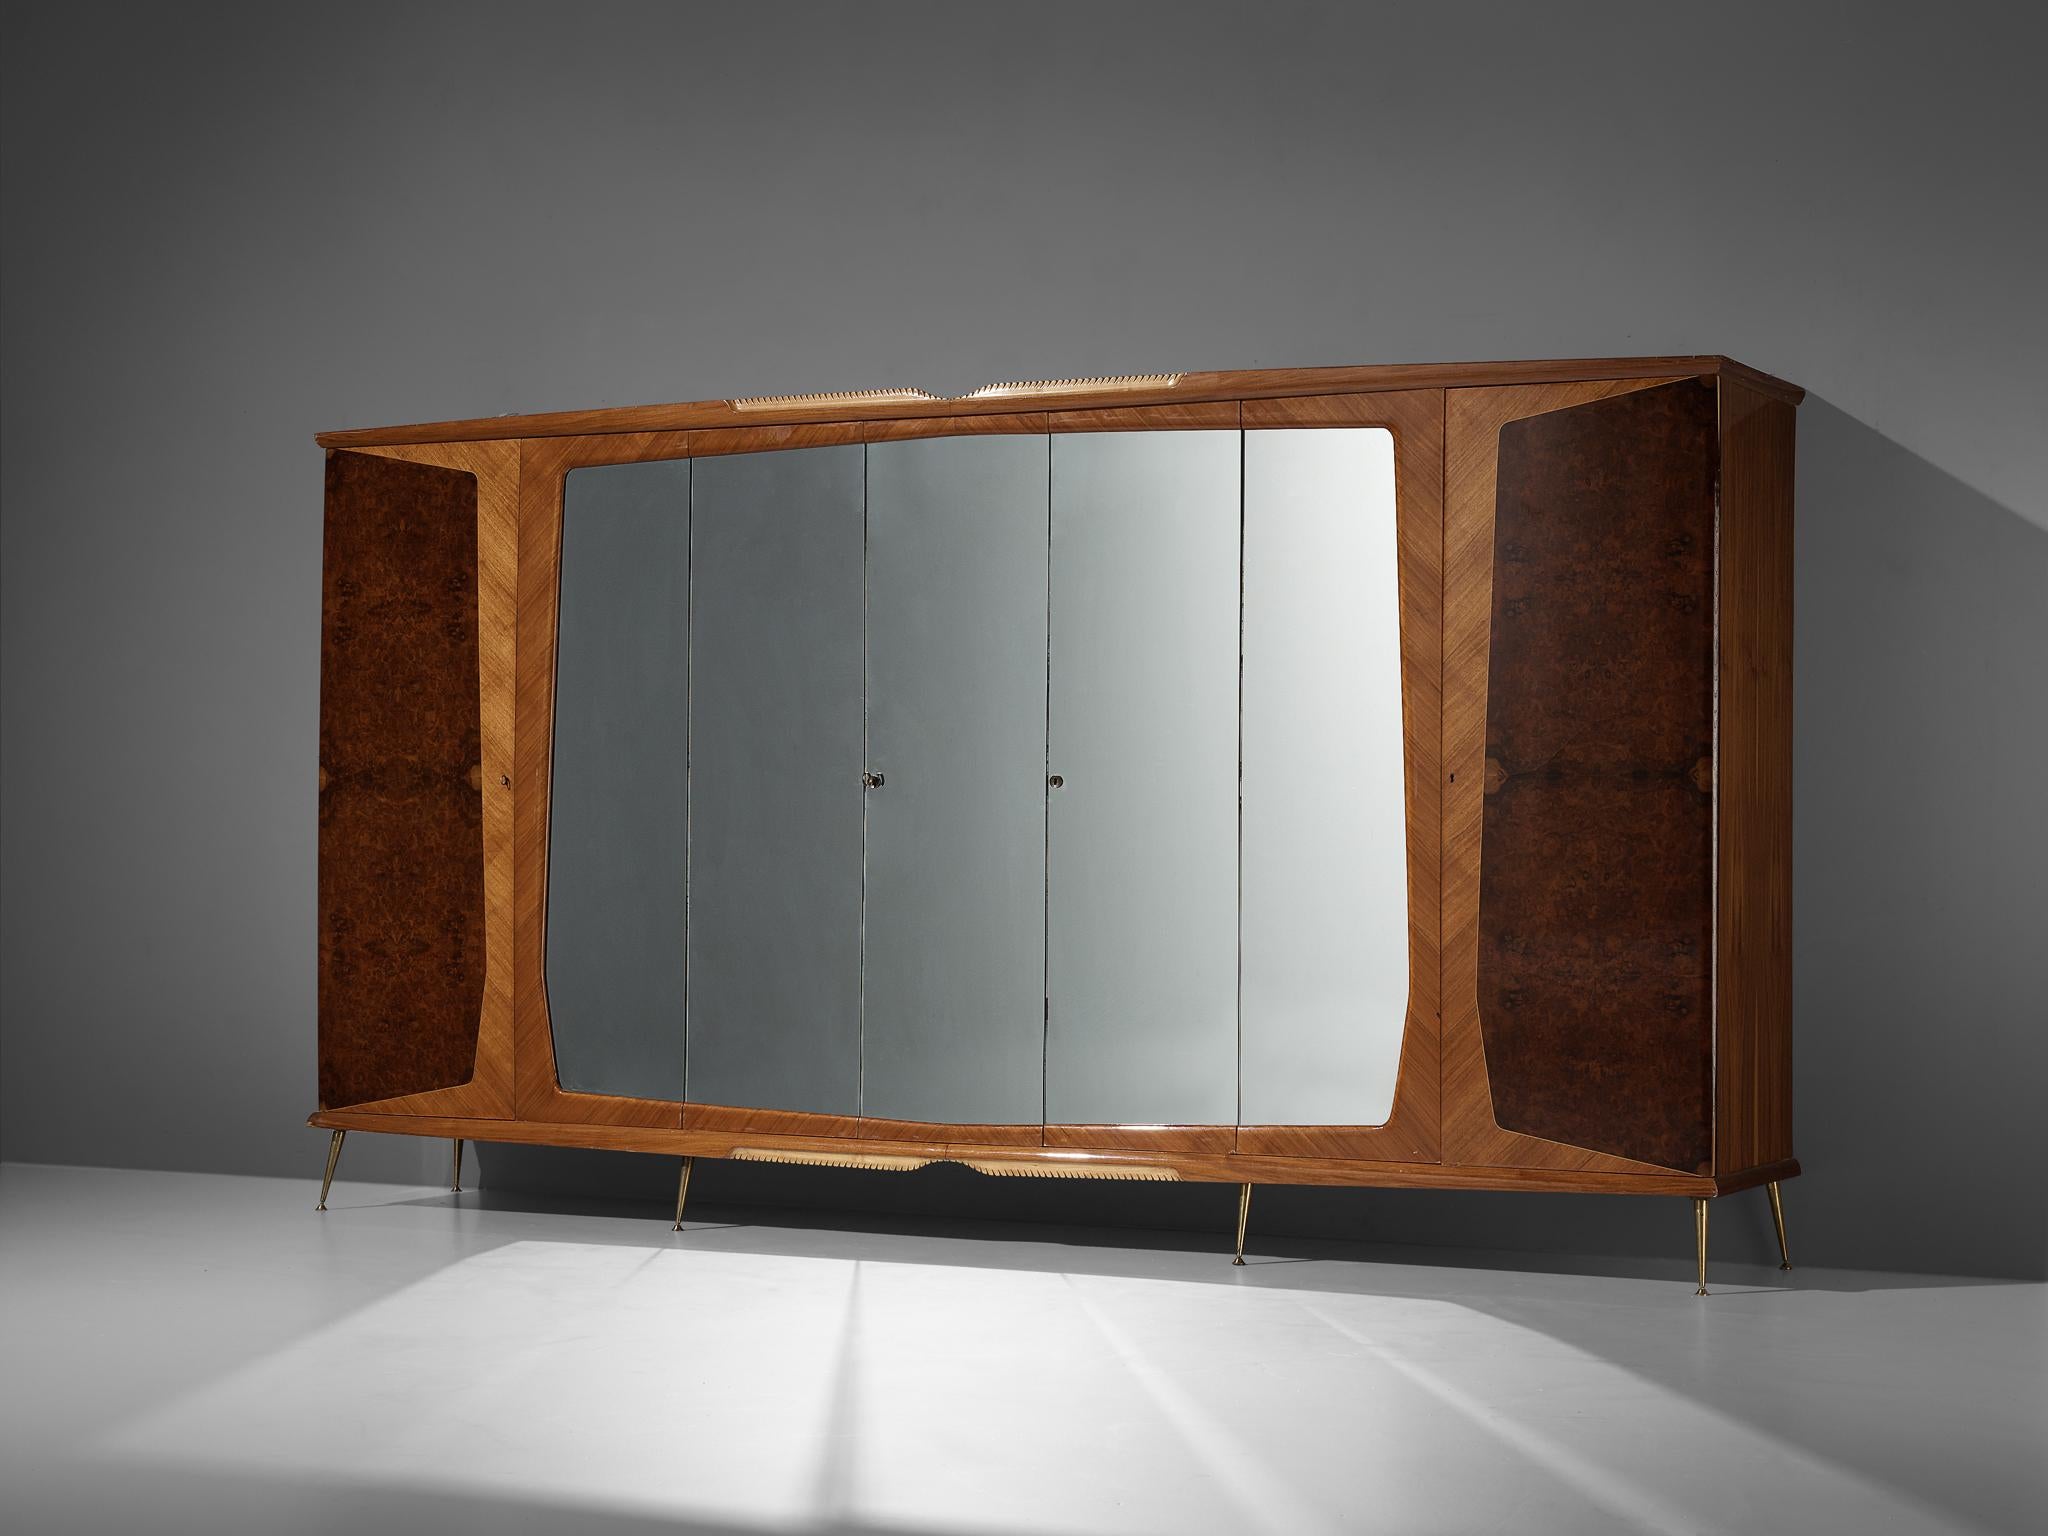 Wardrobe, walnut burl and veneer, glass, brass, Italy, 1950s

A beautiful and luxurious Italian wardrobe or very large cabinet. With its seven doors this wardrobe has an impressive size. Five doors hold a mirrored surface, the two outer doors show